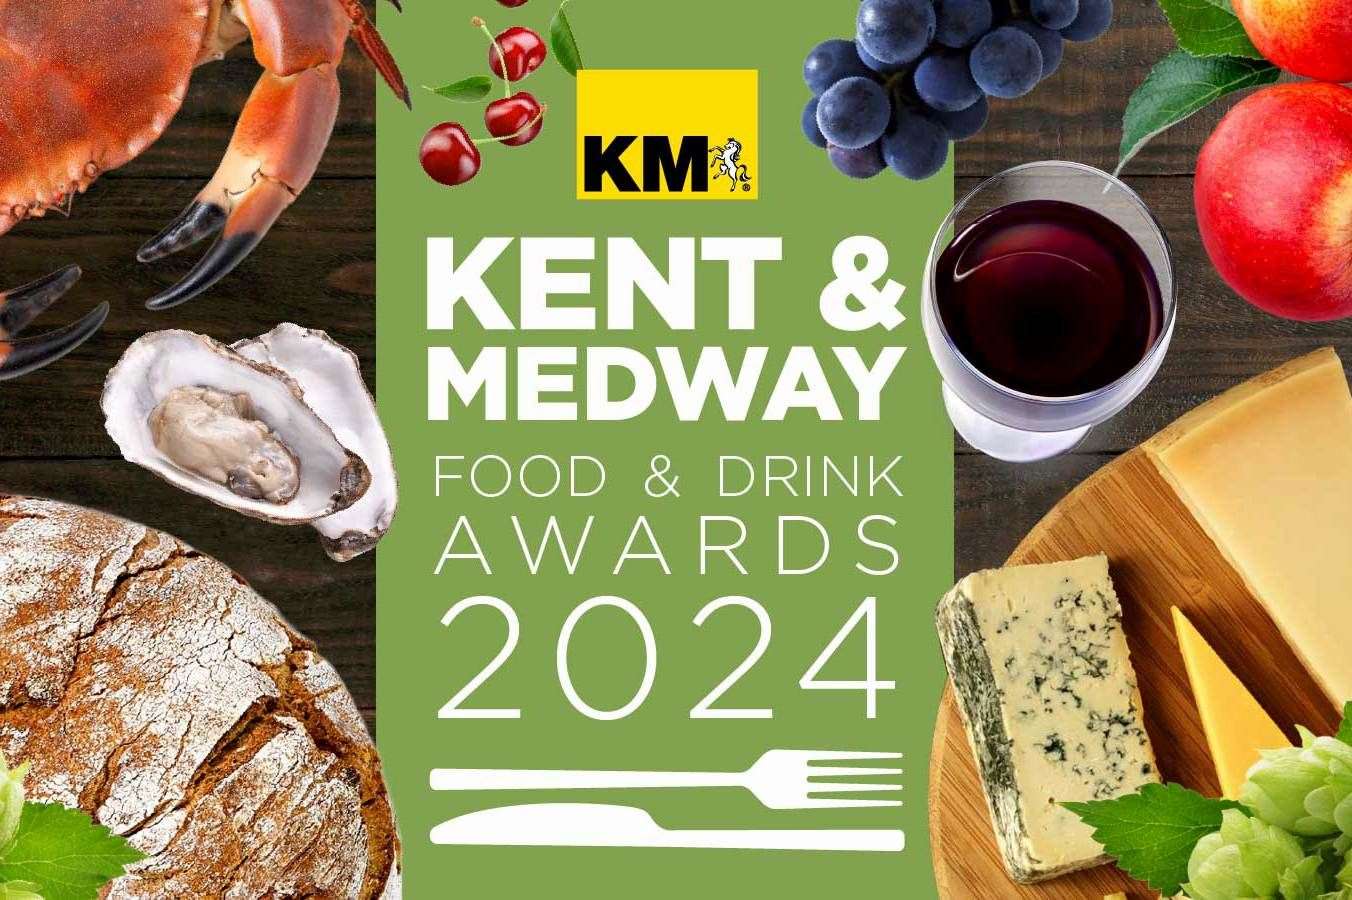 It's time to reveal the finalists for the first Kent & Medway Food & Drink Awards